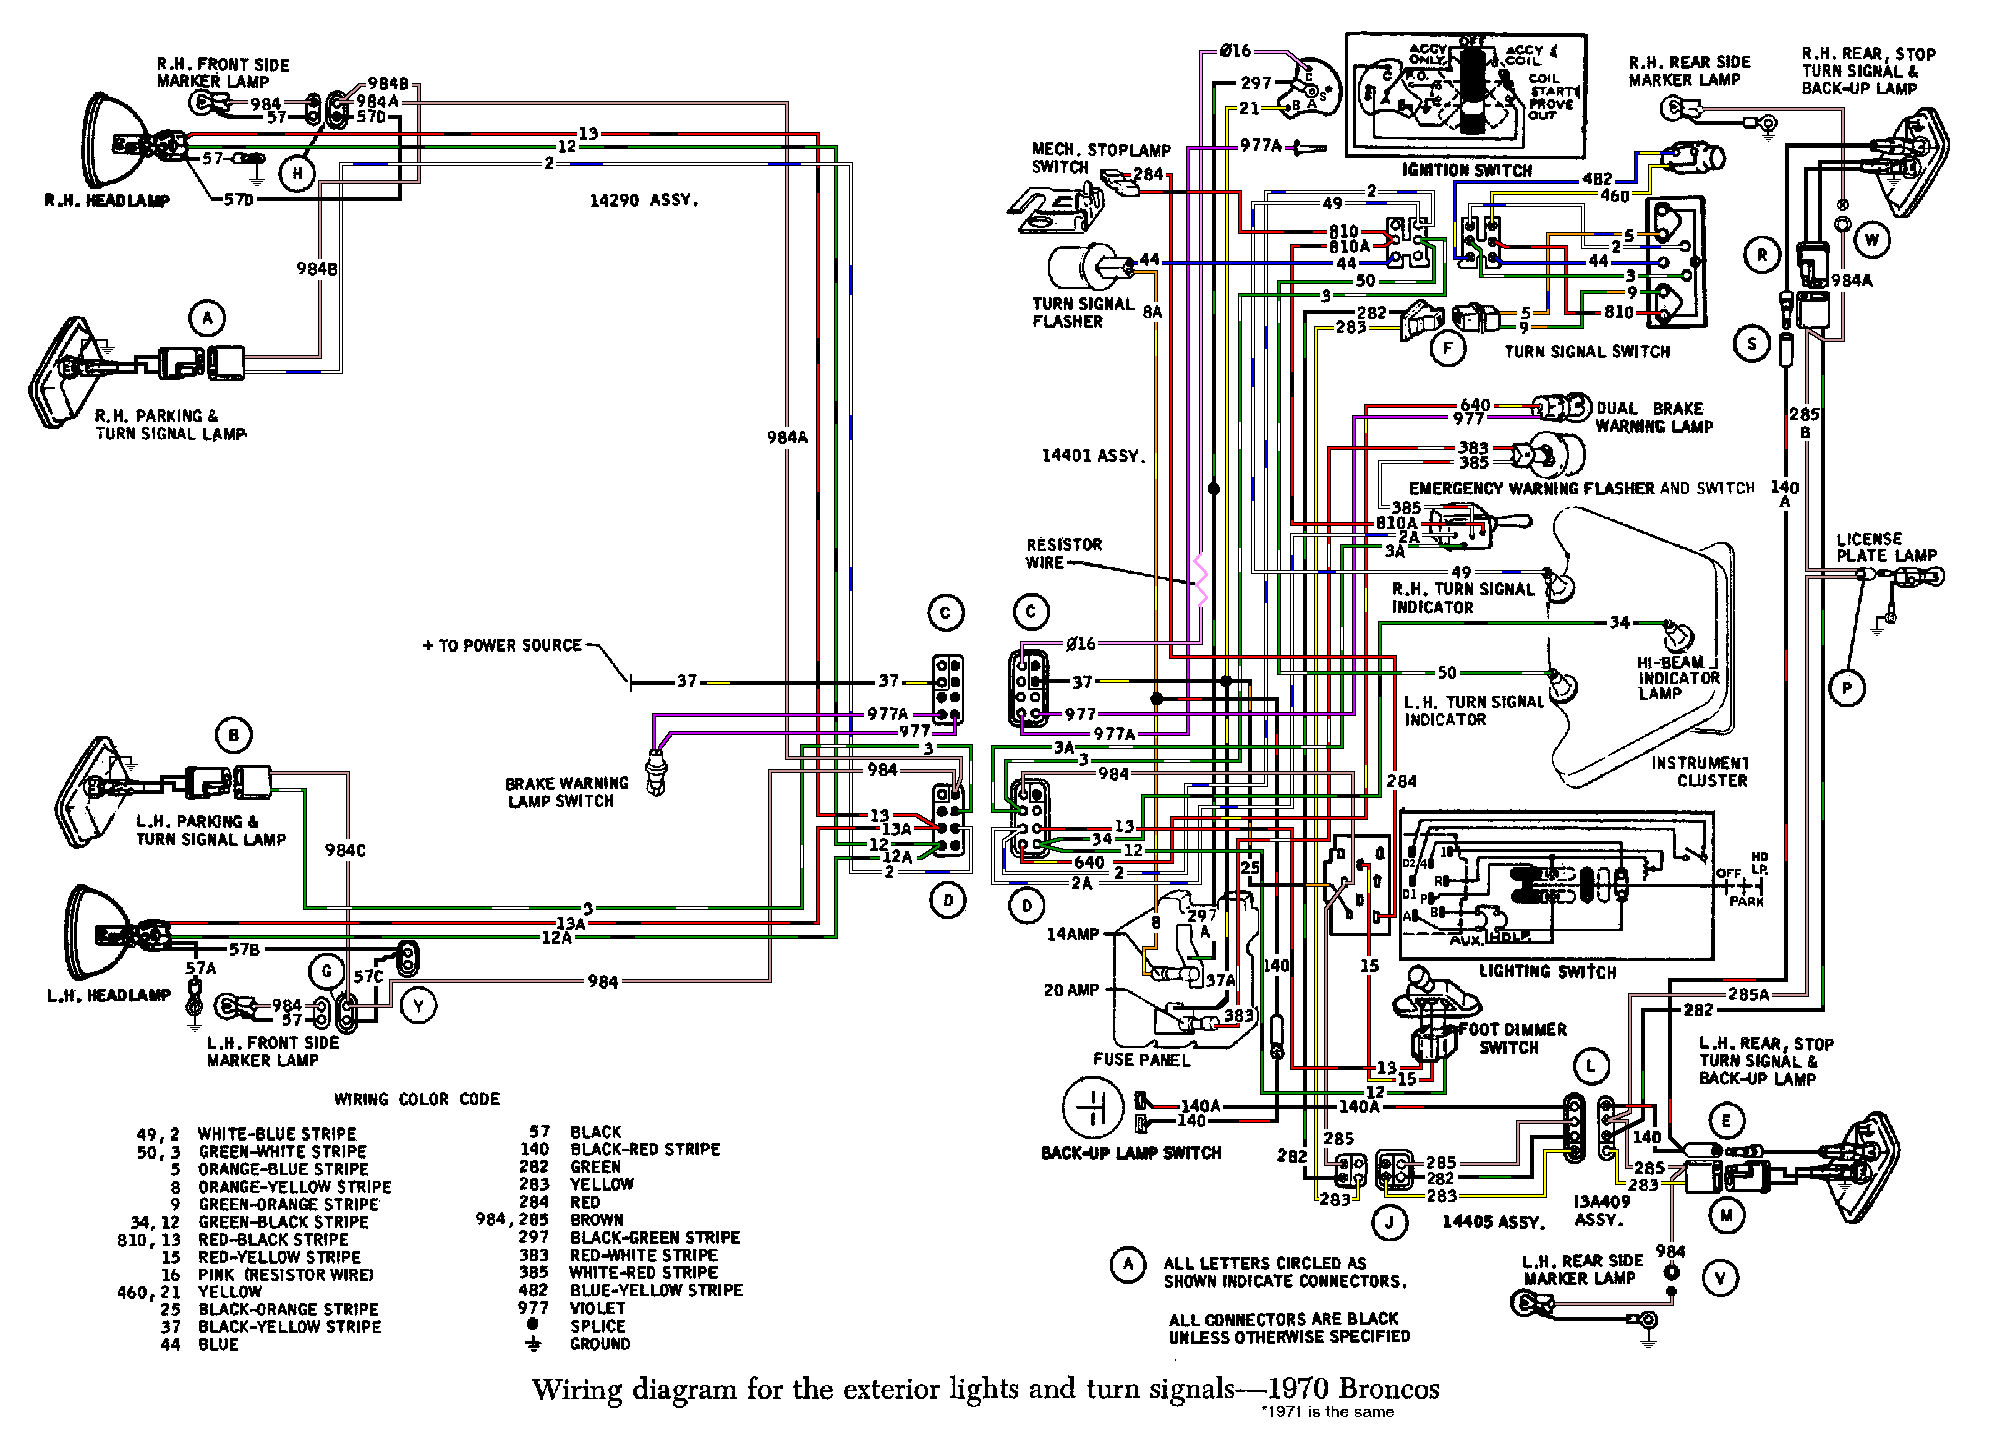 1968 Ford F100 Wiring Diagram from seabiscuit68.tripod.com